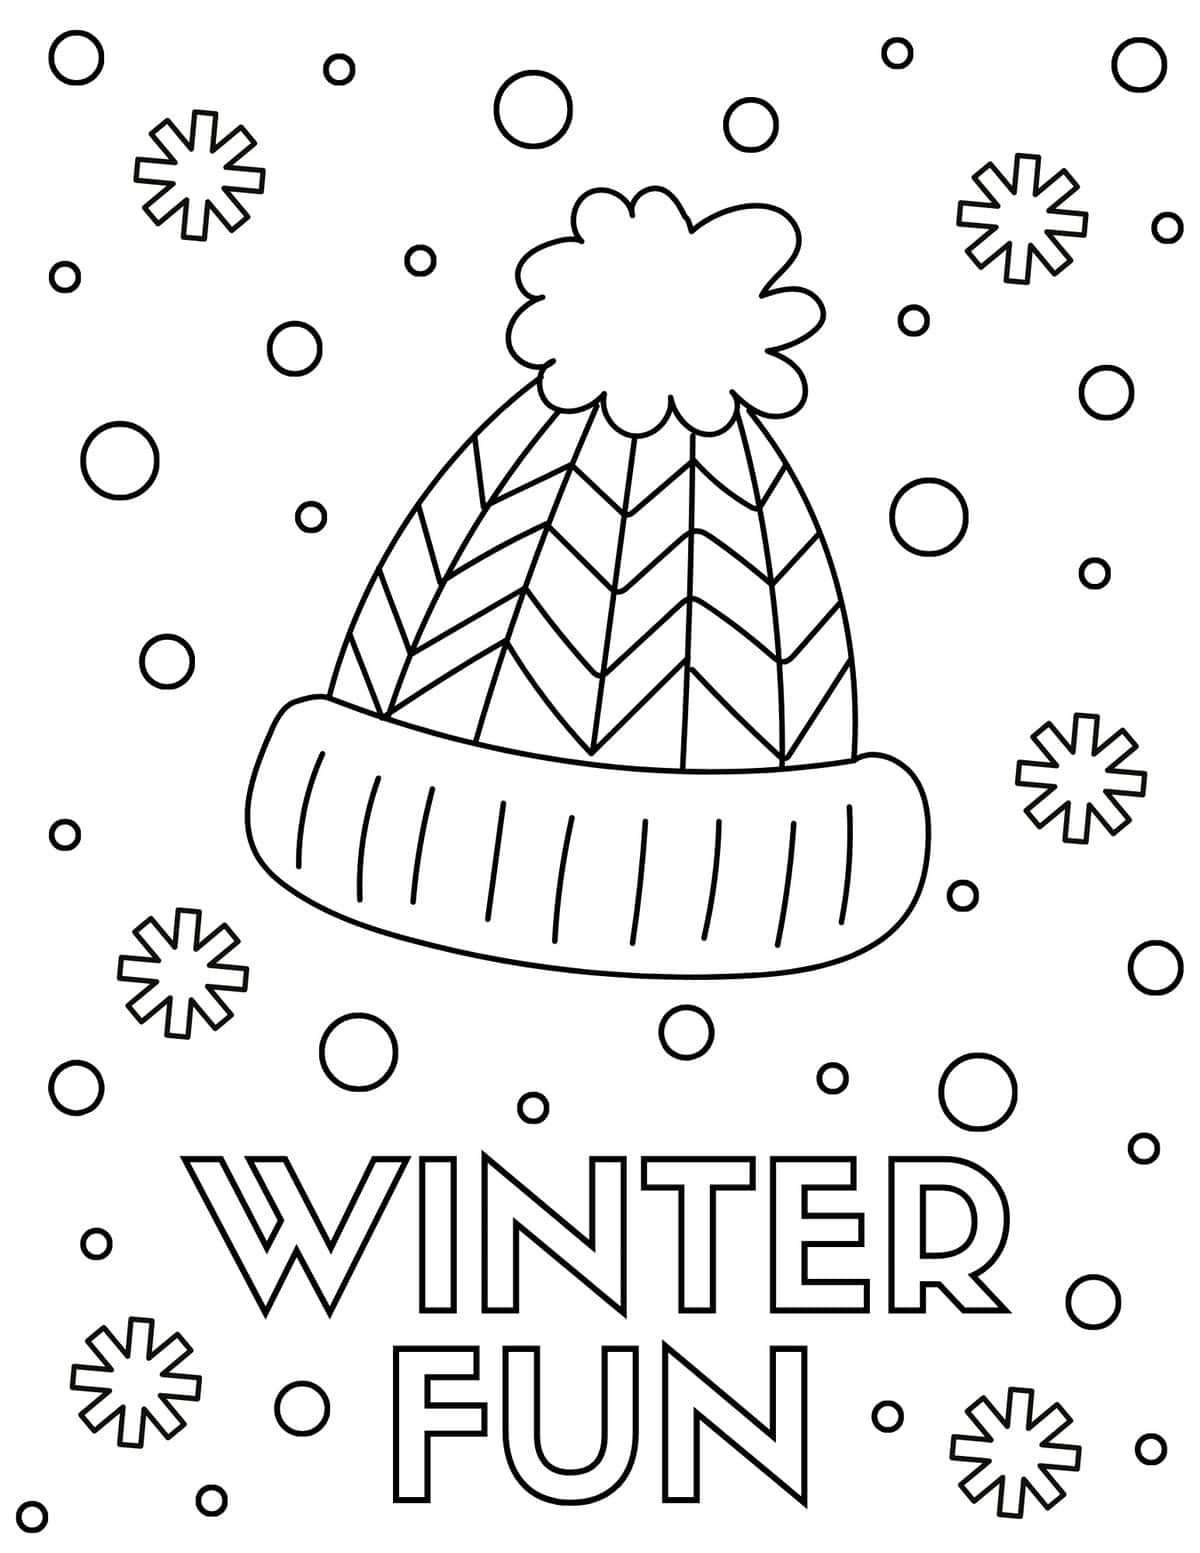 Winter fun coloring pages